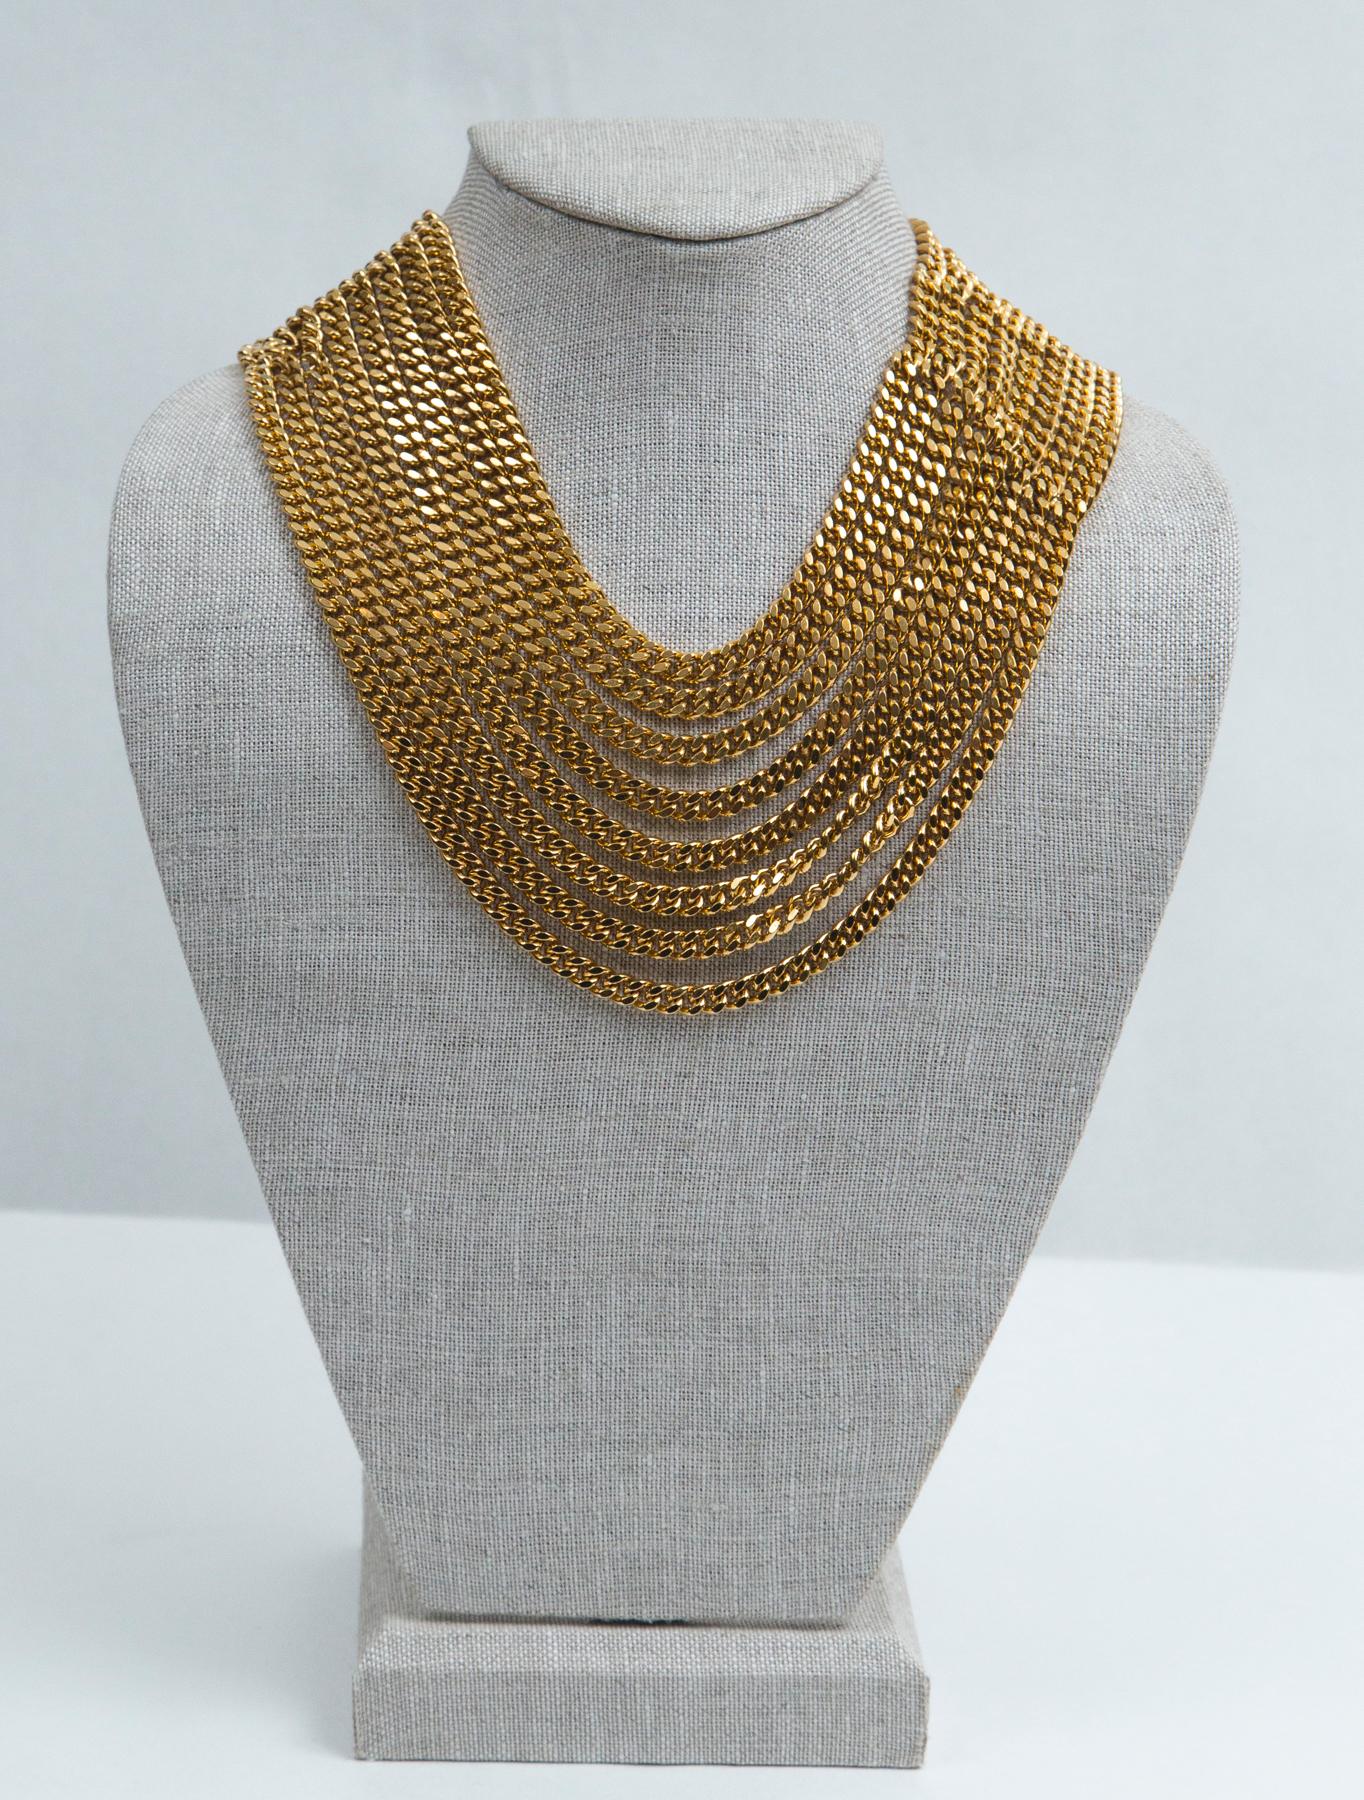 Chanel Multiple Layer Gold Chain Necklace, Stamped with Chanel, CC, Made in France 